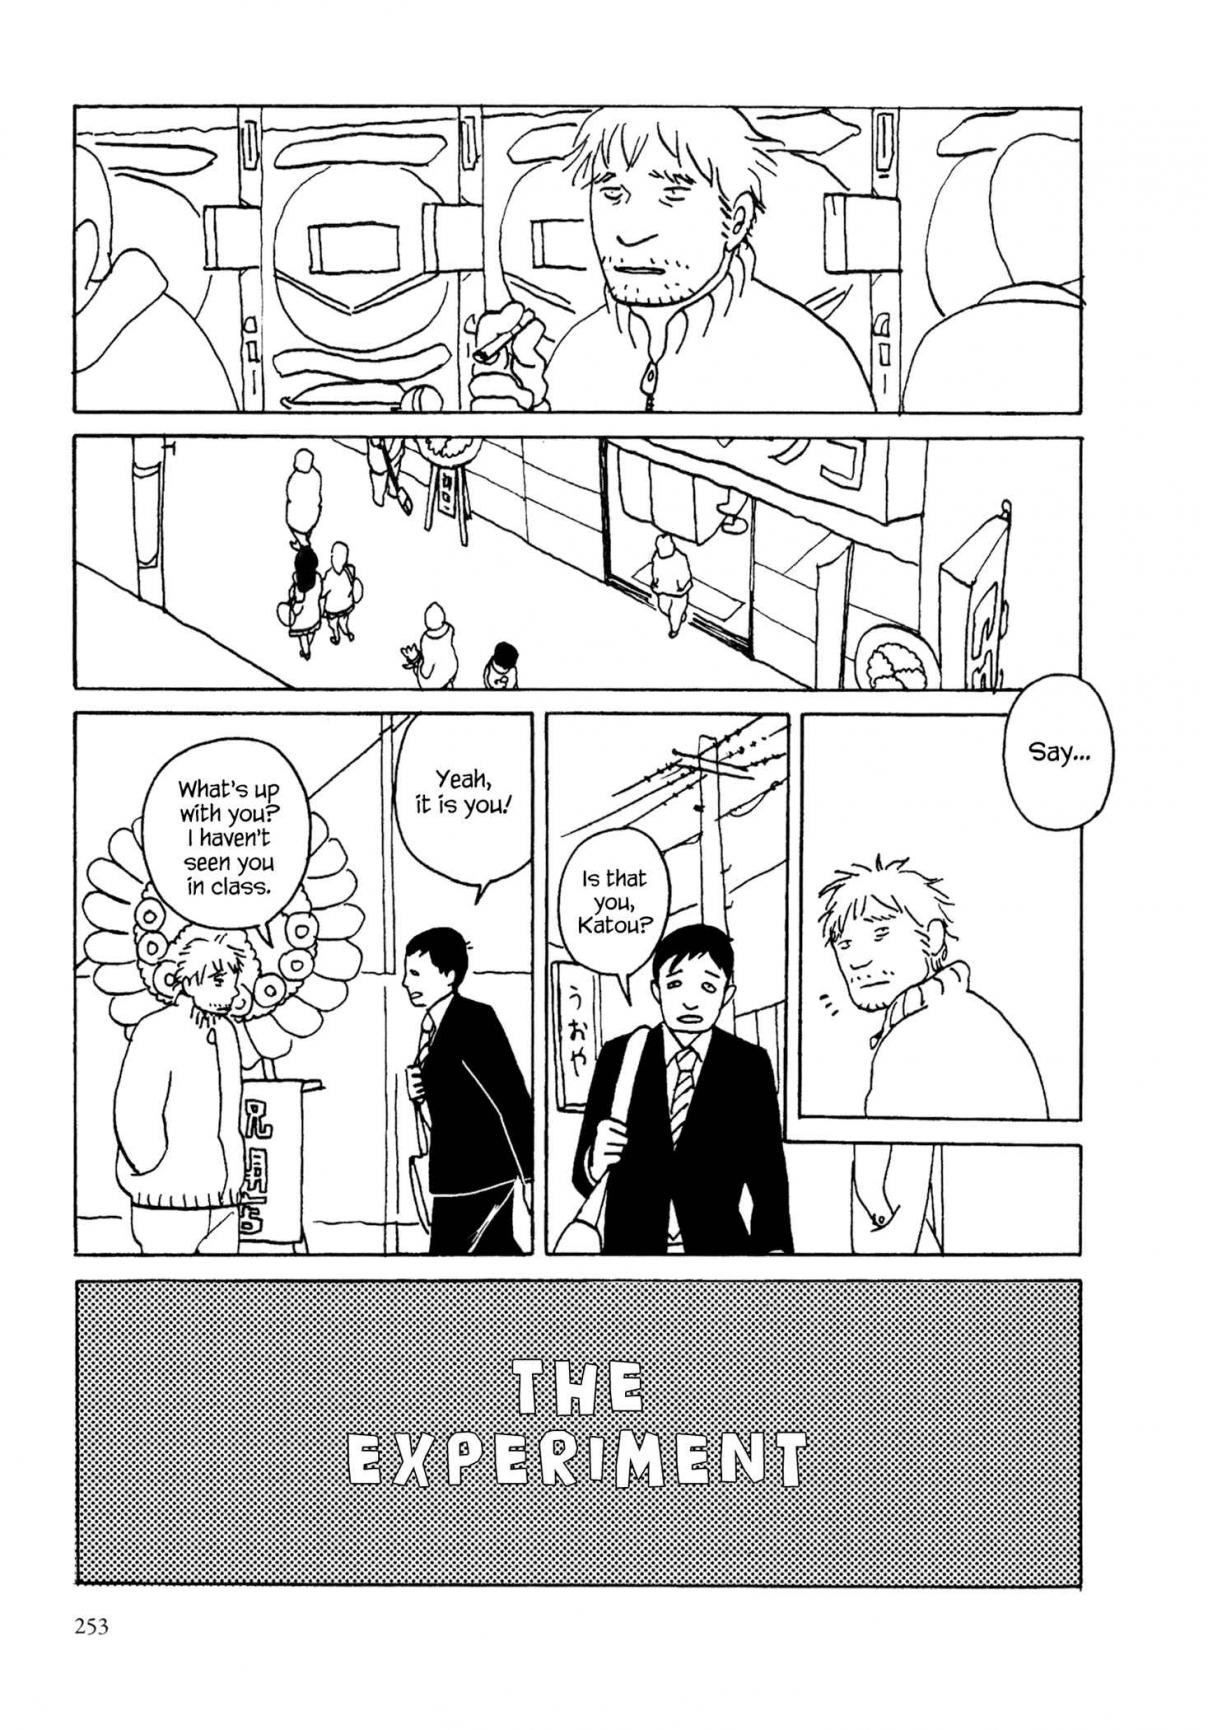 The Dragon's School is on The Top of The Mountain Vol. 1 Ch. 9 The Experiment